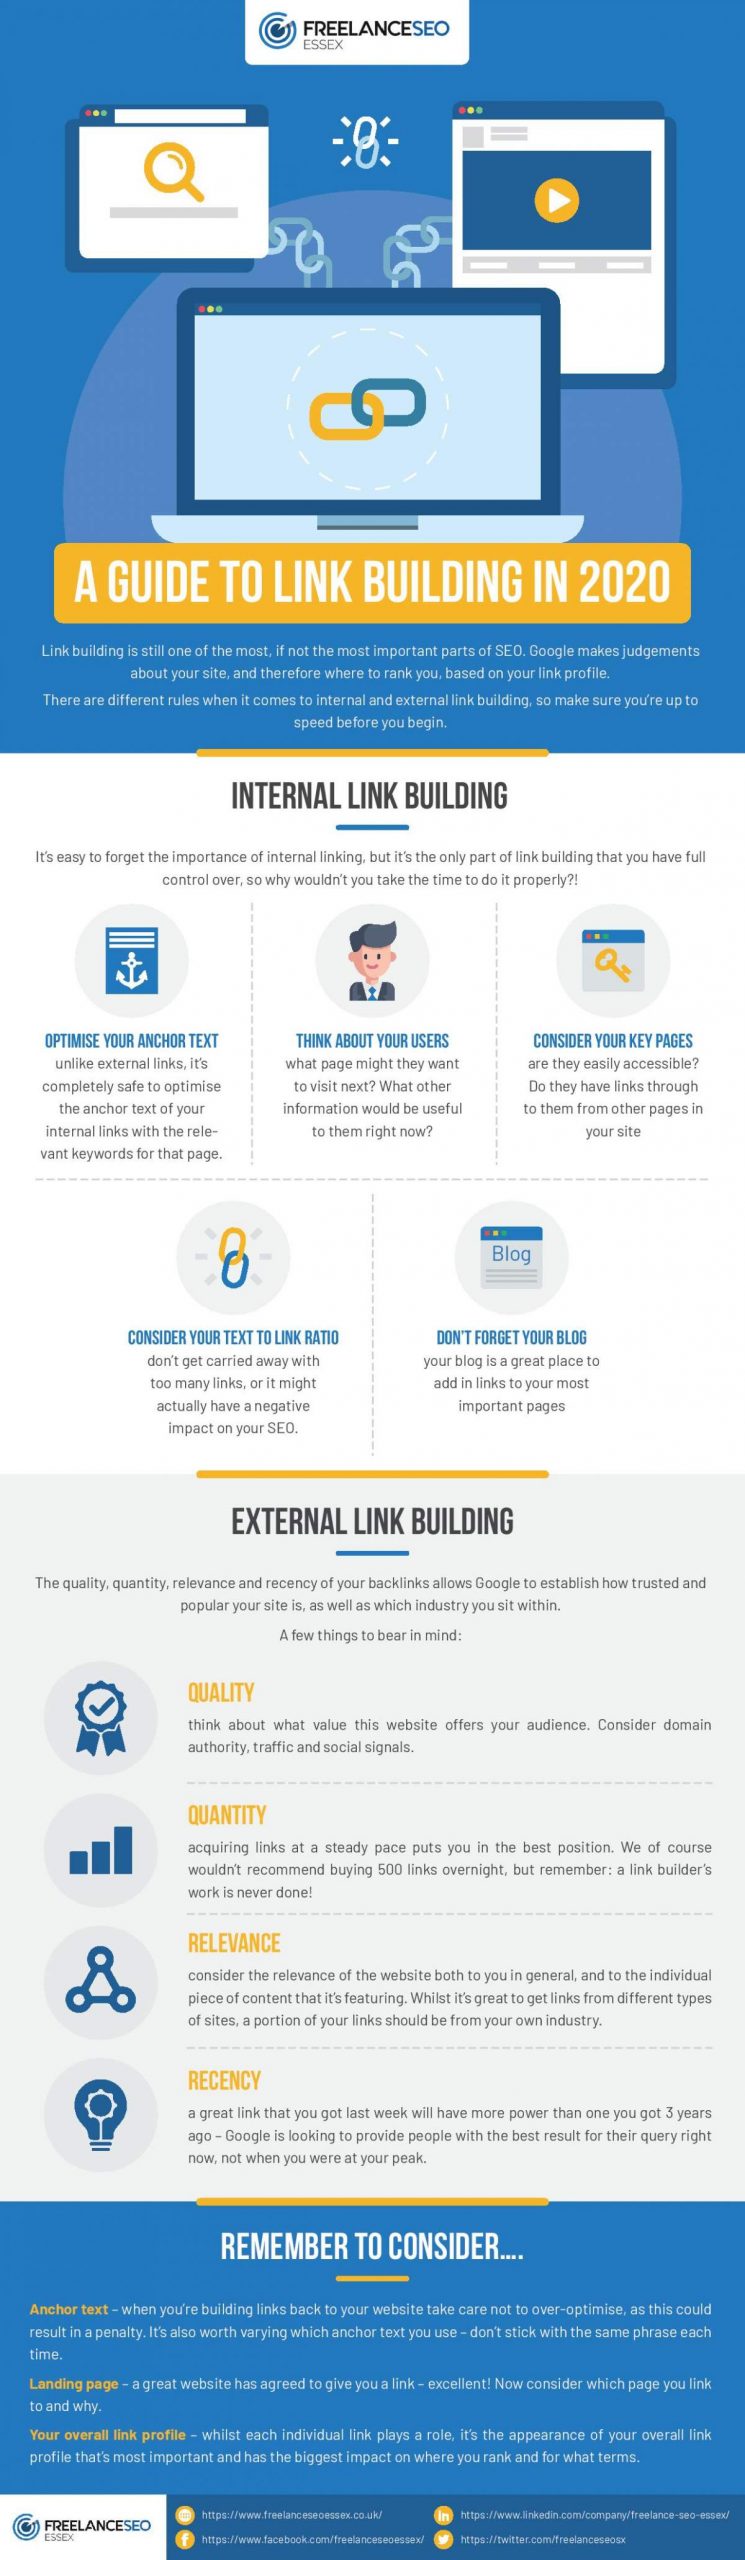 A guide to link building in 2020